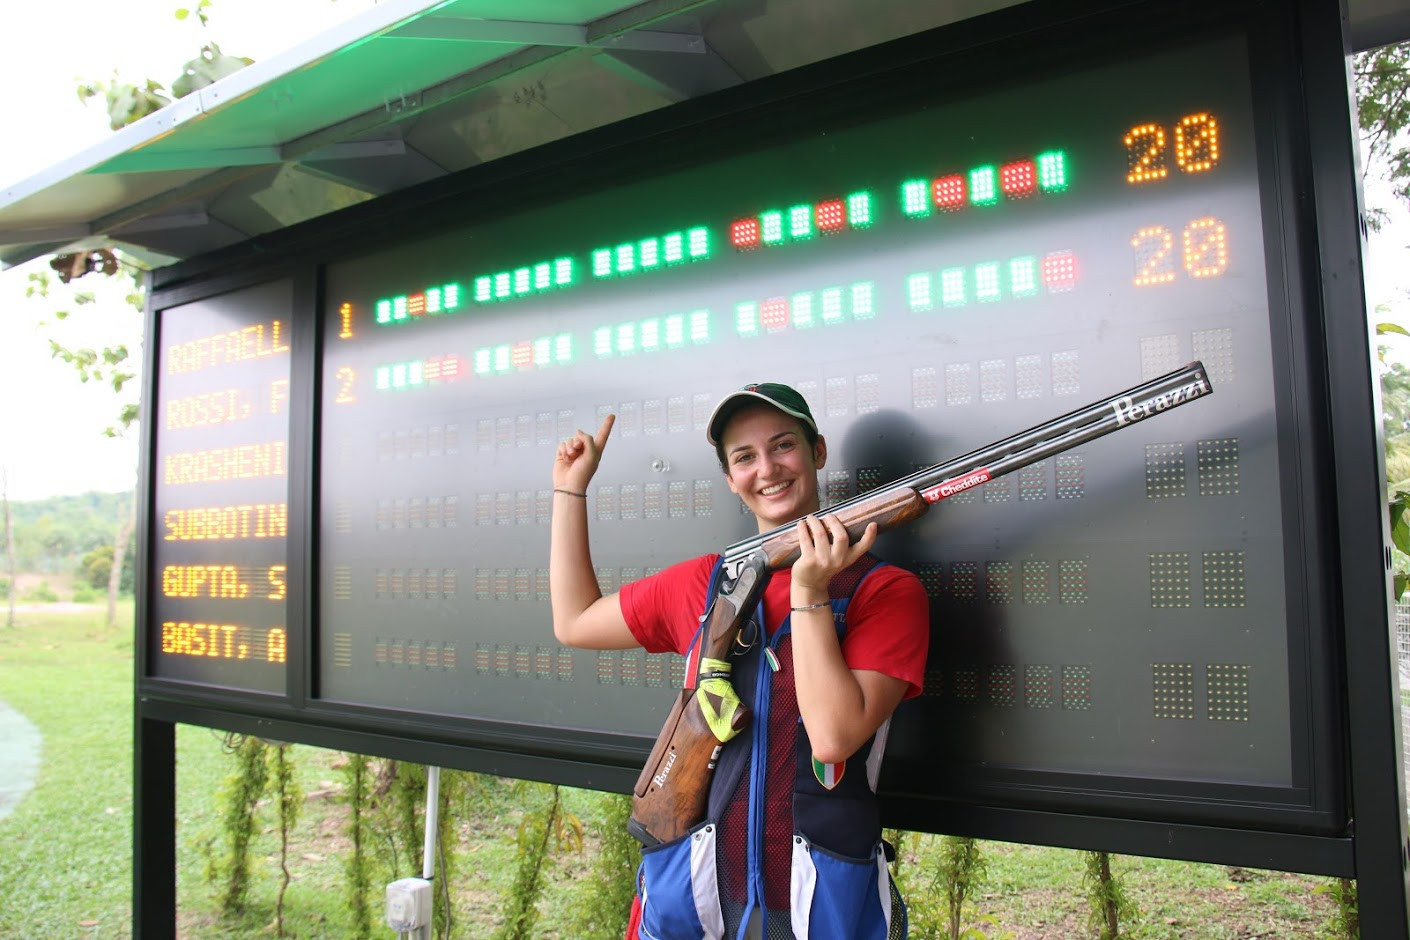 Italy earn double gold on opening day of World University Shooting Championship